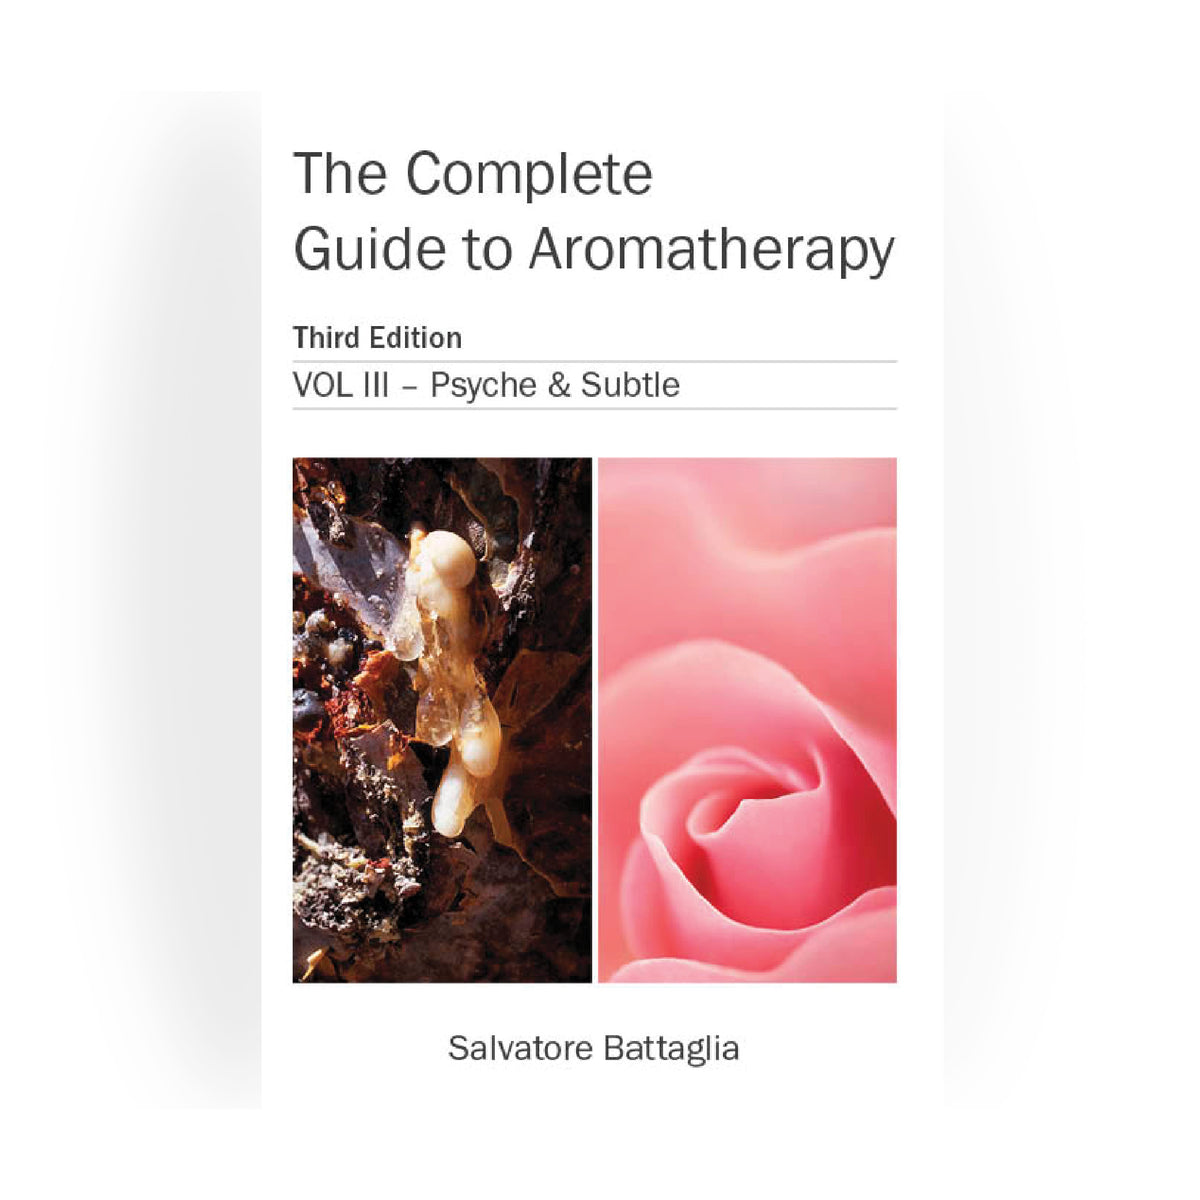 The Complete Guide to Aromatherapy Third Edition Vol III